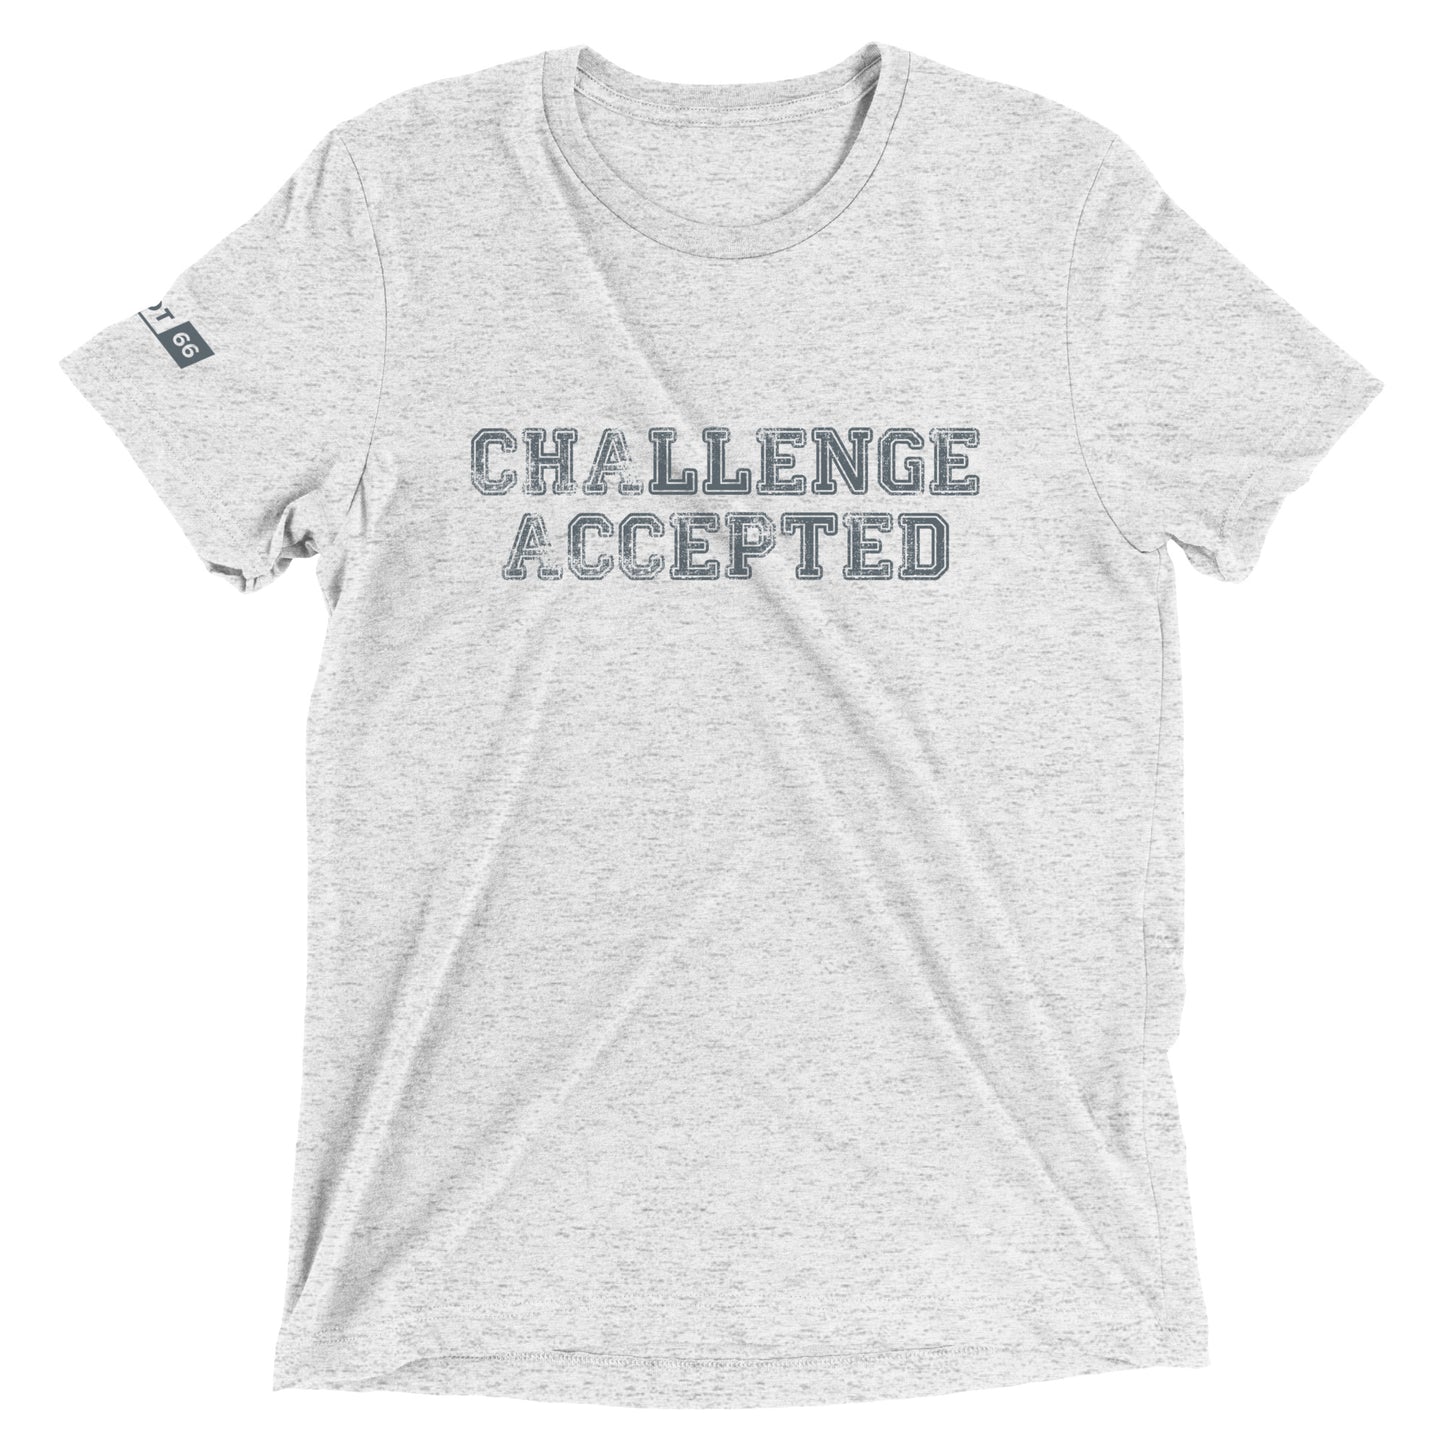 Reboot 66 - Challenge Accepted Short sleeve t-shirt